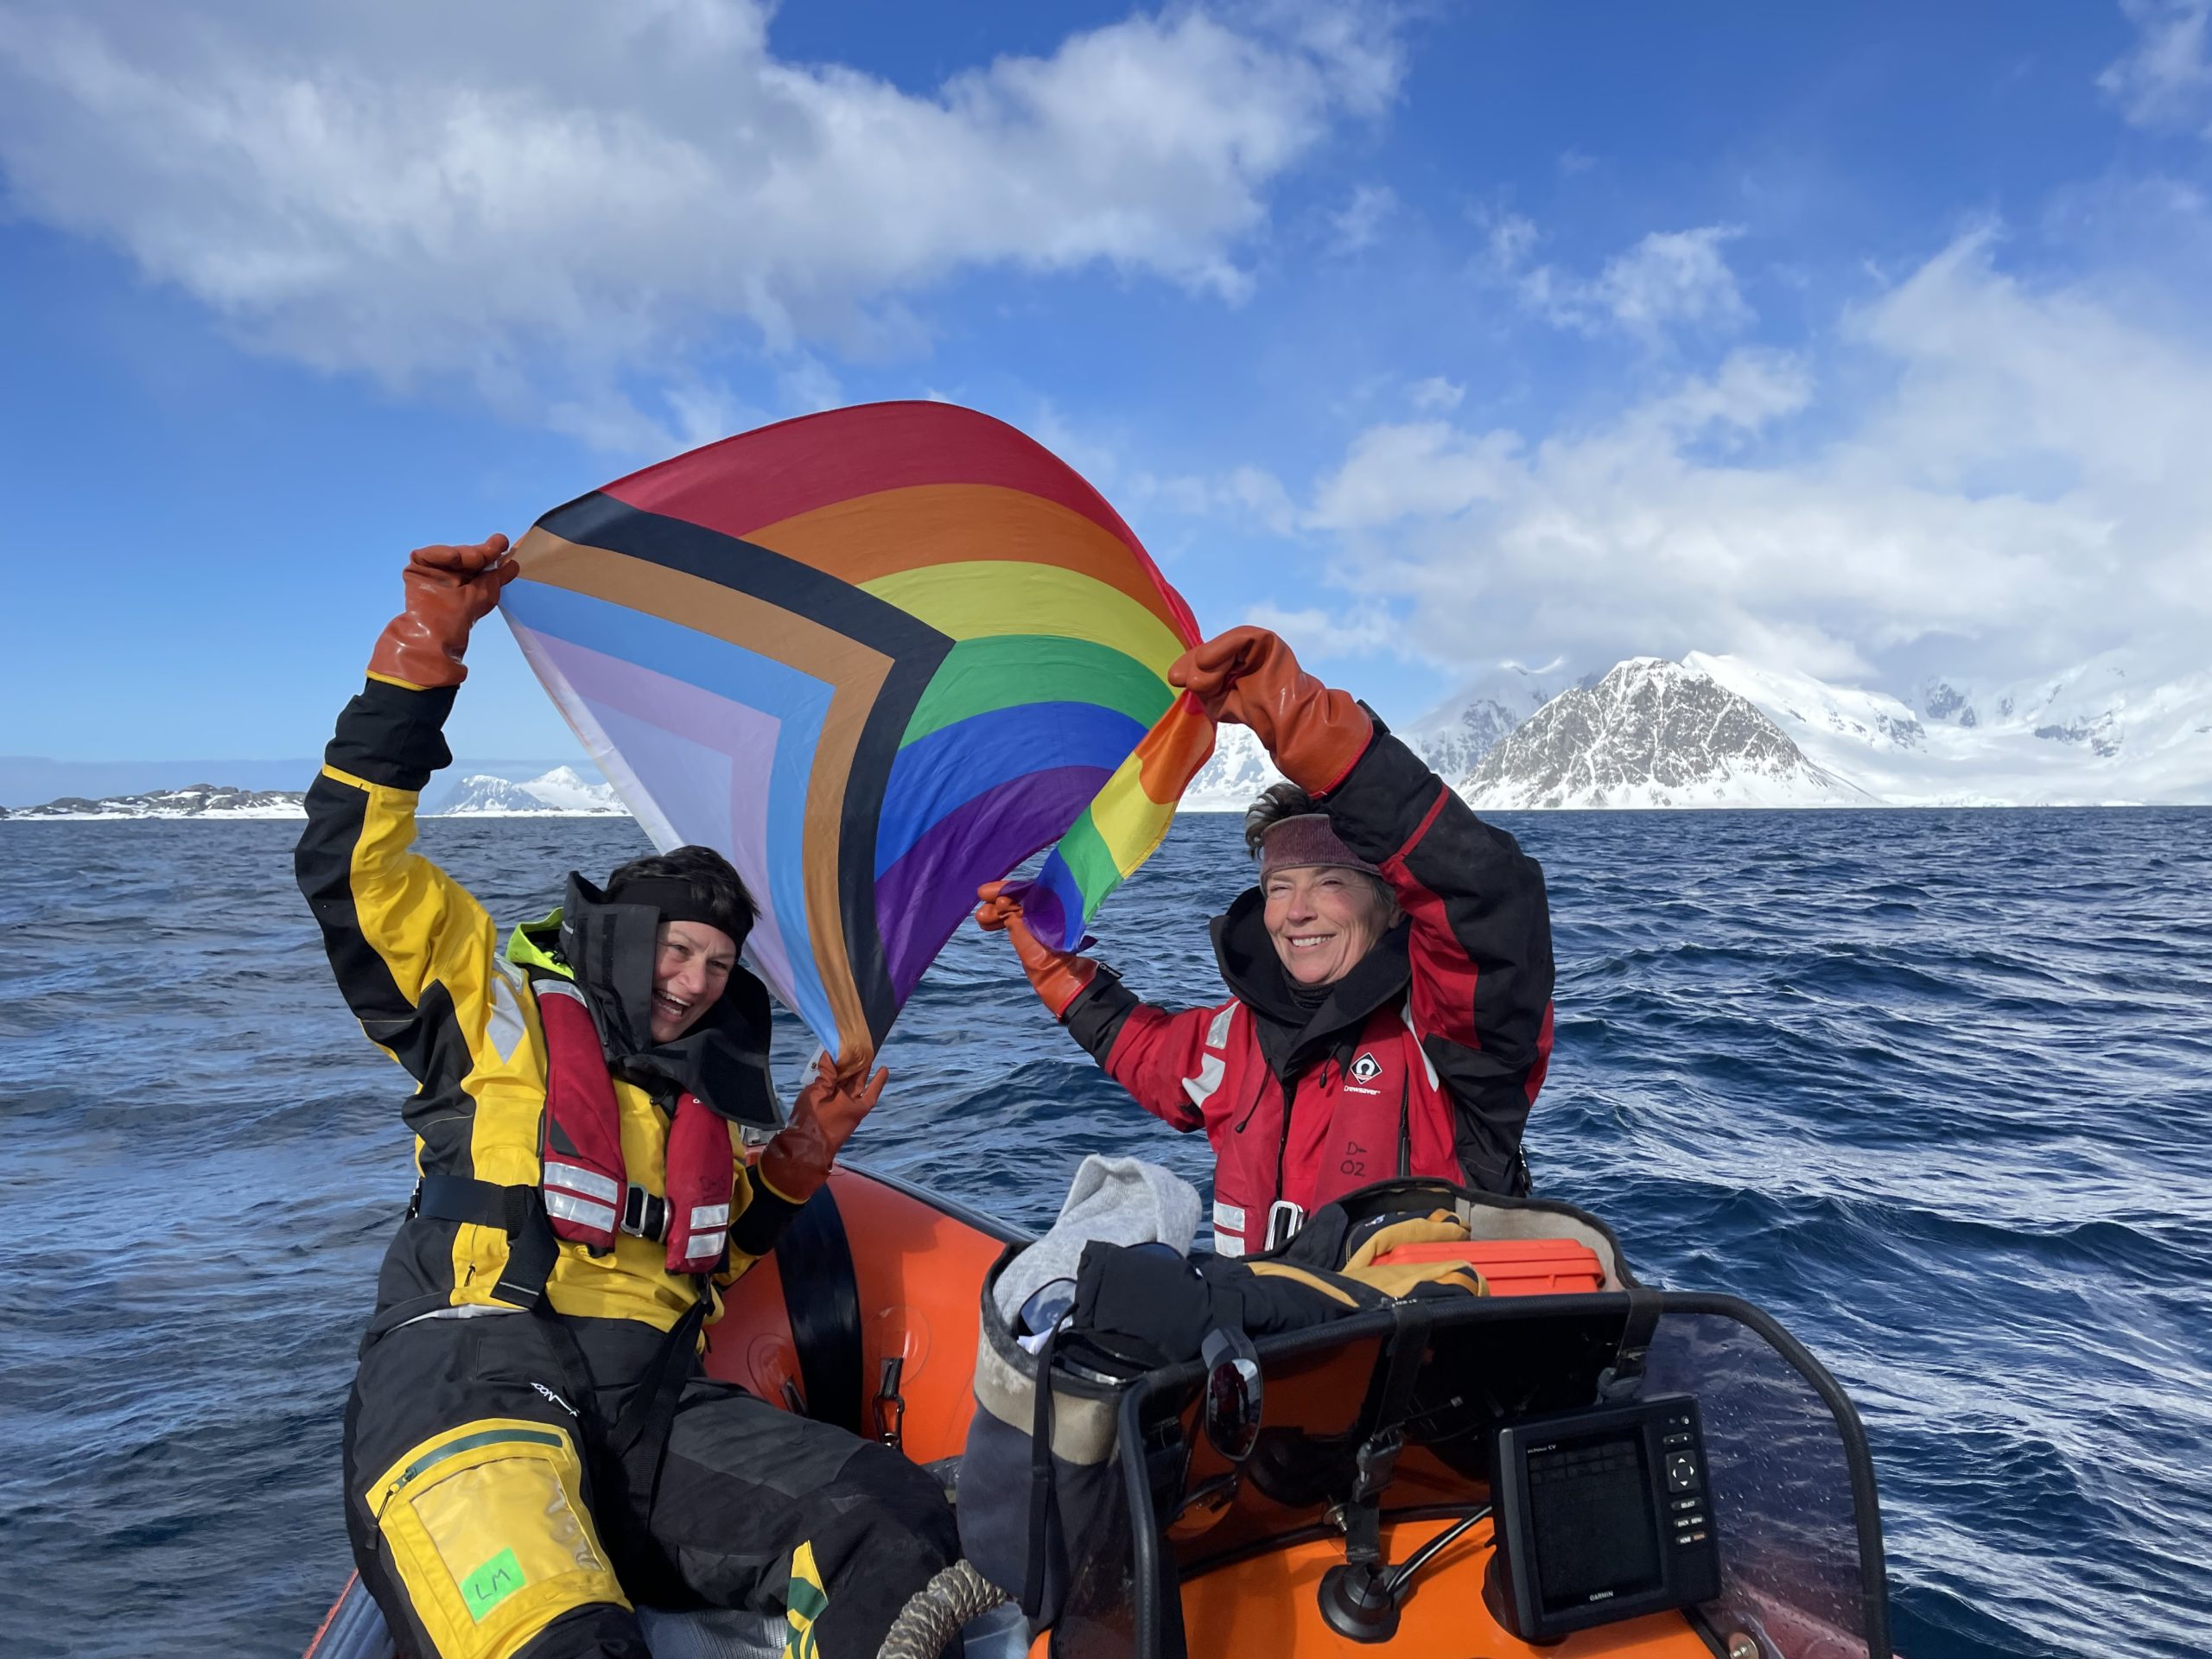 Two people are sat in a small boat holding up a rainbow Pride flag. There is a snowy mountain in the back.